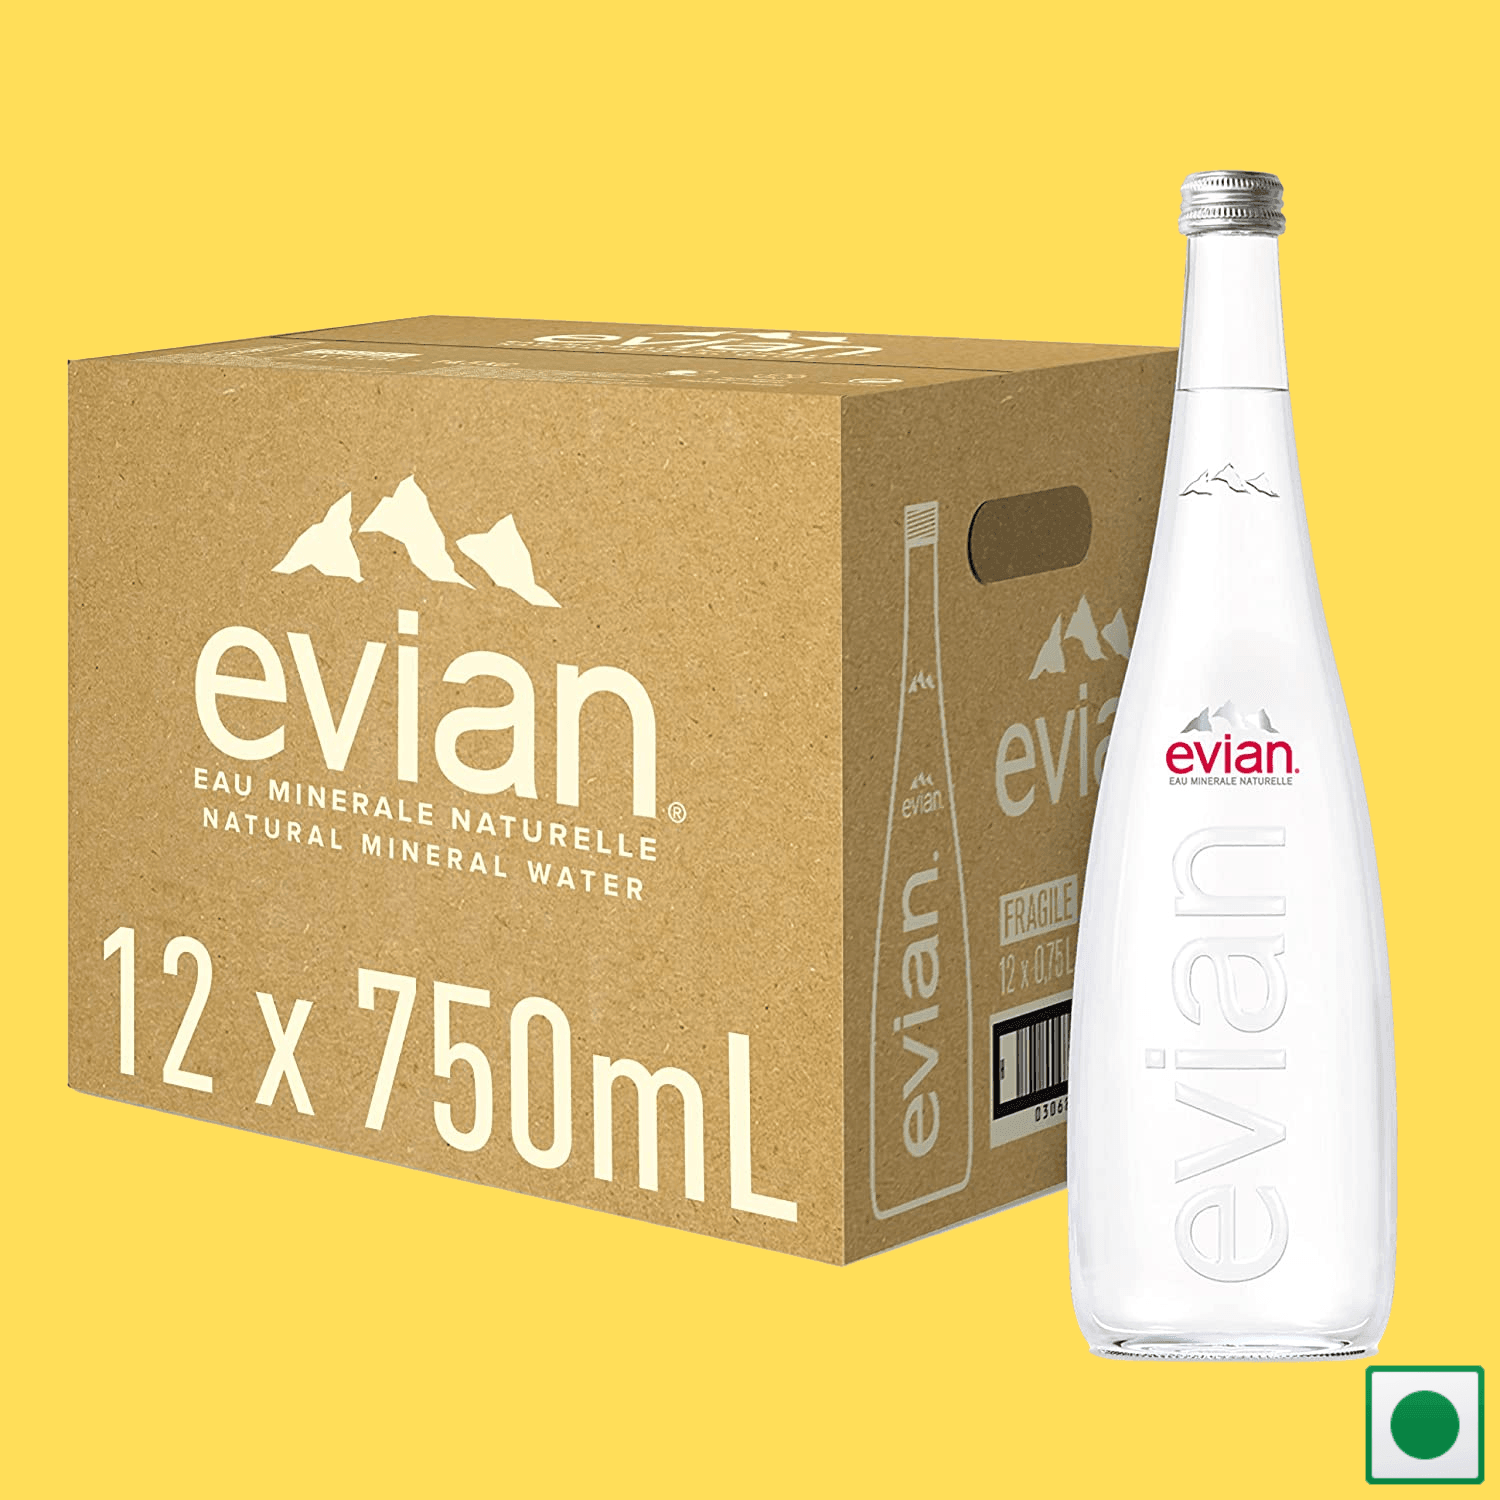 Evian Natural Mineral Water Glass Bottle, 12 x 750ml (Imported)